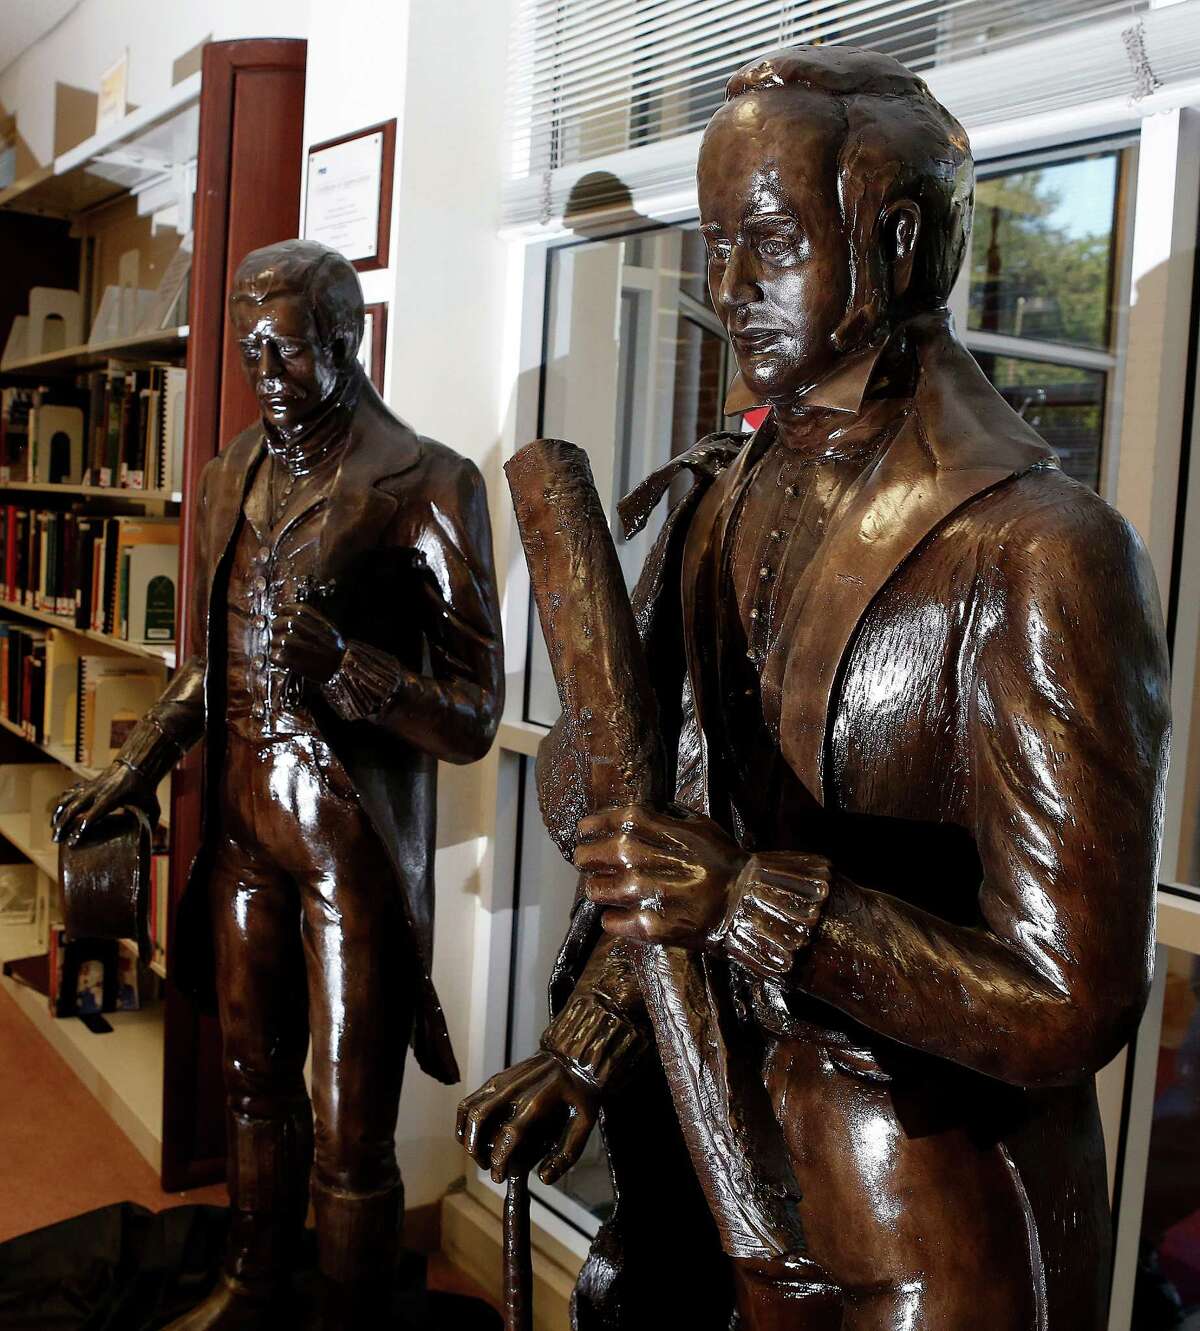 Statues of the Allen brothers, Augustus Chapman Allen (left) and John Kirby Allen (right), created by artist Lori Betz, are currently sitting in the entrance of the Clayton Library Center for Genealogical Research, Thursday, Nov. 12, 2015, in Houston. The city plans to install the statues at the east entrance to city hall later this month.